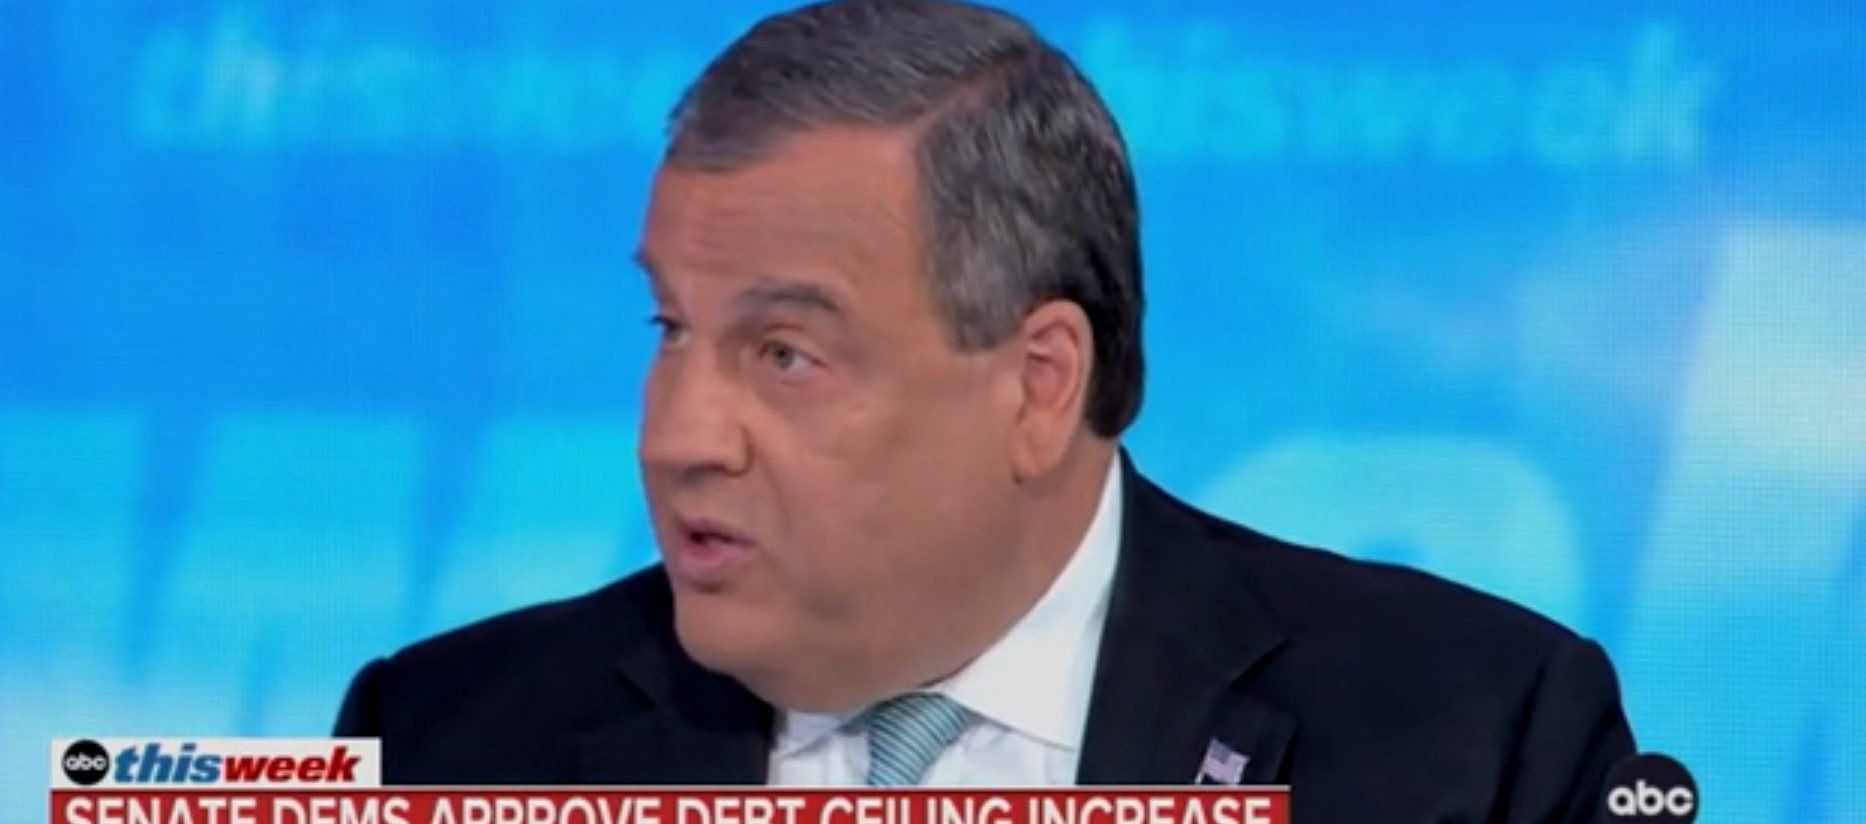 ‘It Is A Sign Of His Immaturity’: Chris Christie Slams Schumer For Speech ‘Kicking [Republicans] In The Face’